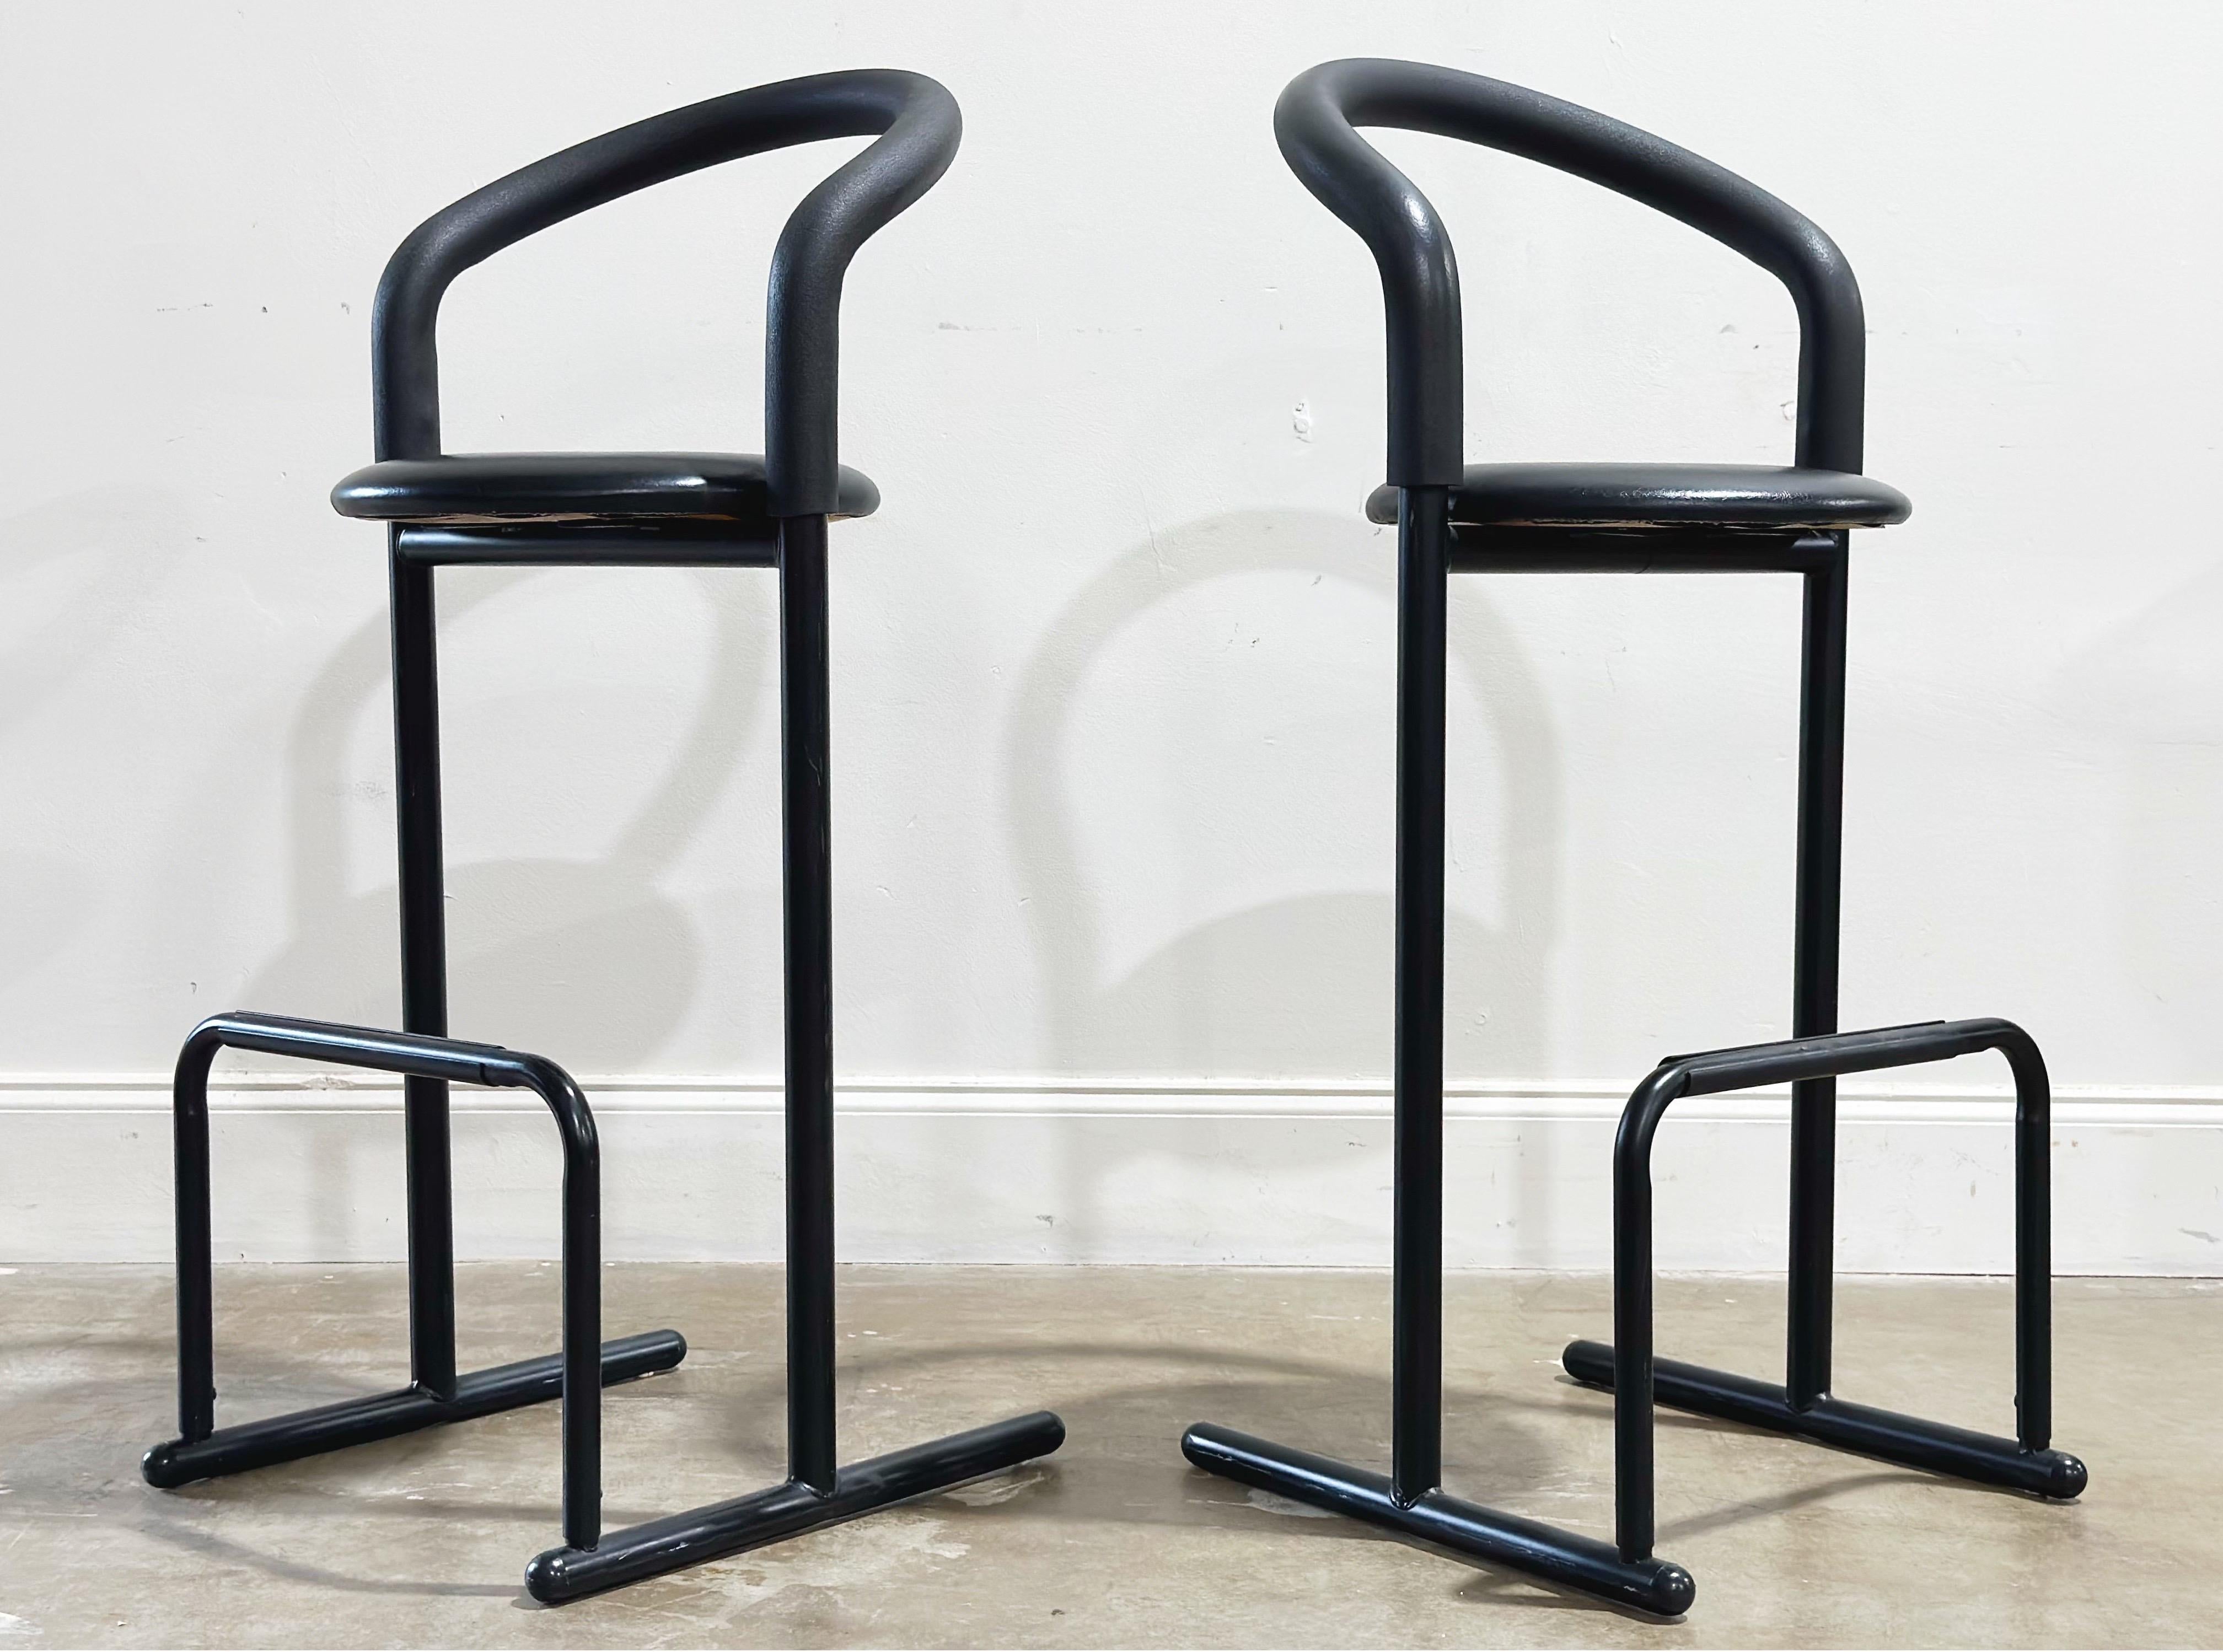 Pair of vintage post modern barstools by Les Industries Amisco - Canada circa 1980s. Bar height. Black metal frames with foam padded back/arm rests and black naugahyde seats. 
Excellent original condition - these stools look to have been hardly, if